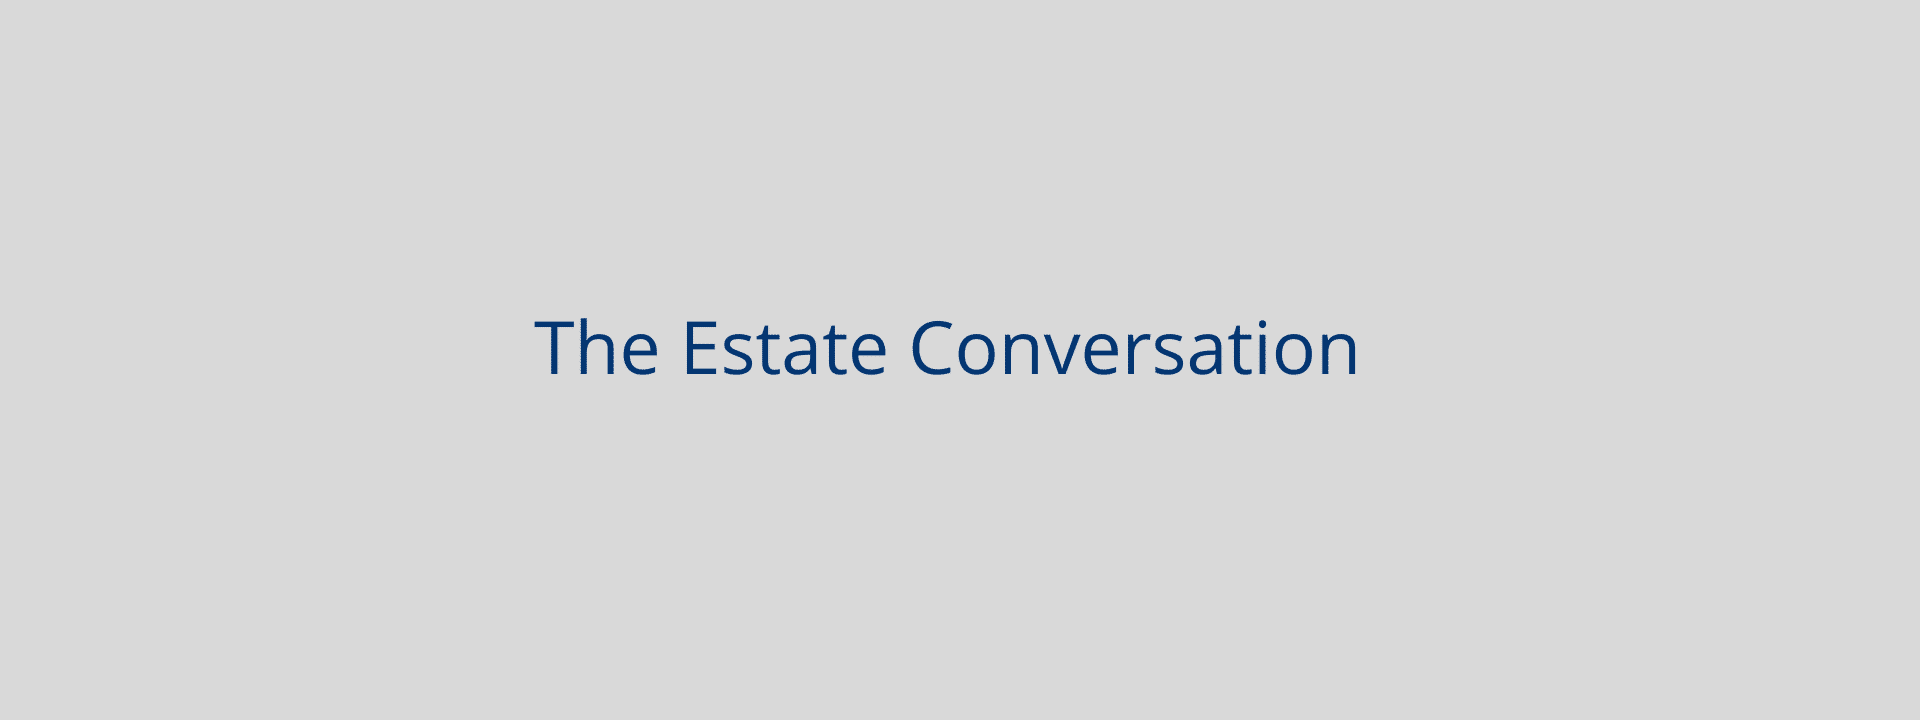 When estate planning it is important to have a conversation